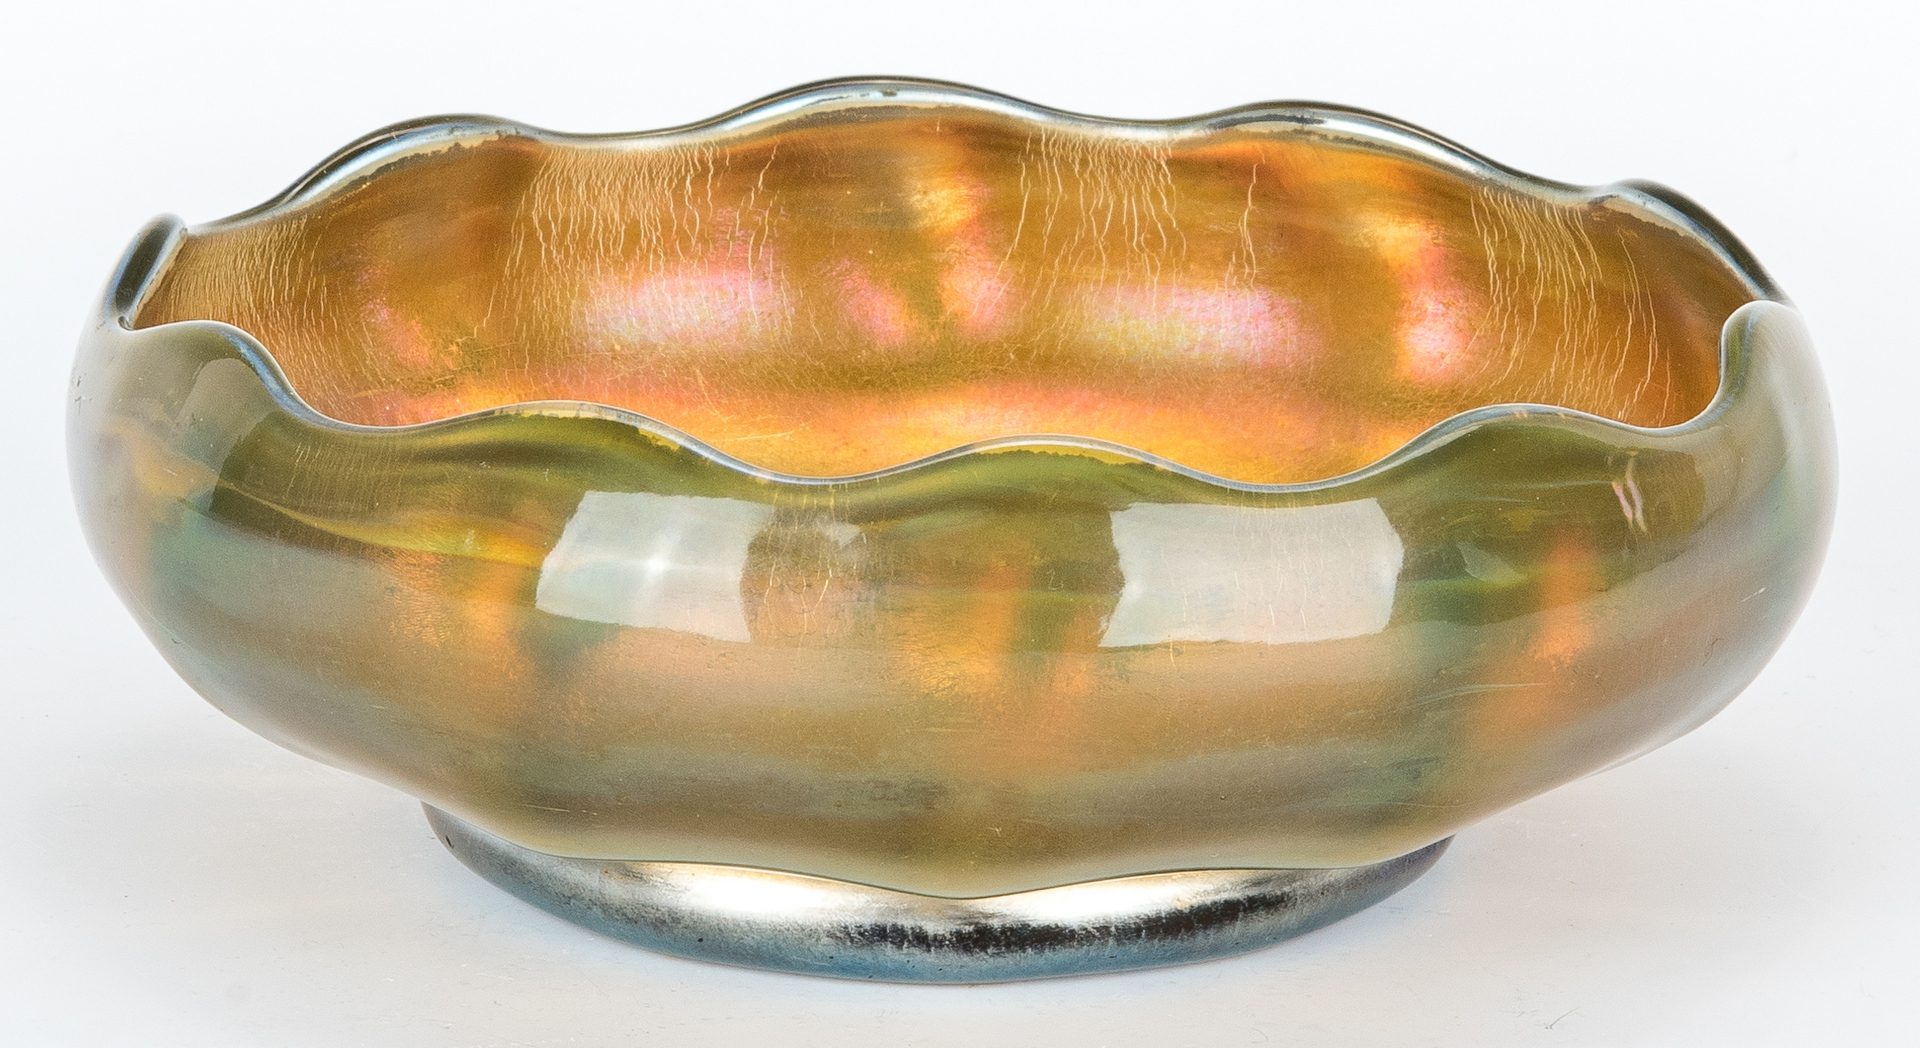 Lot 506: 2 Tiffany Favrile Items, Vase and Bowl